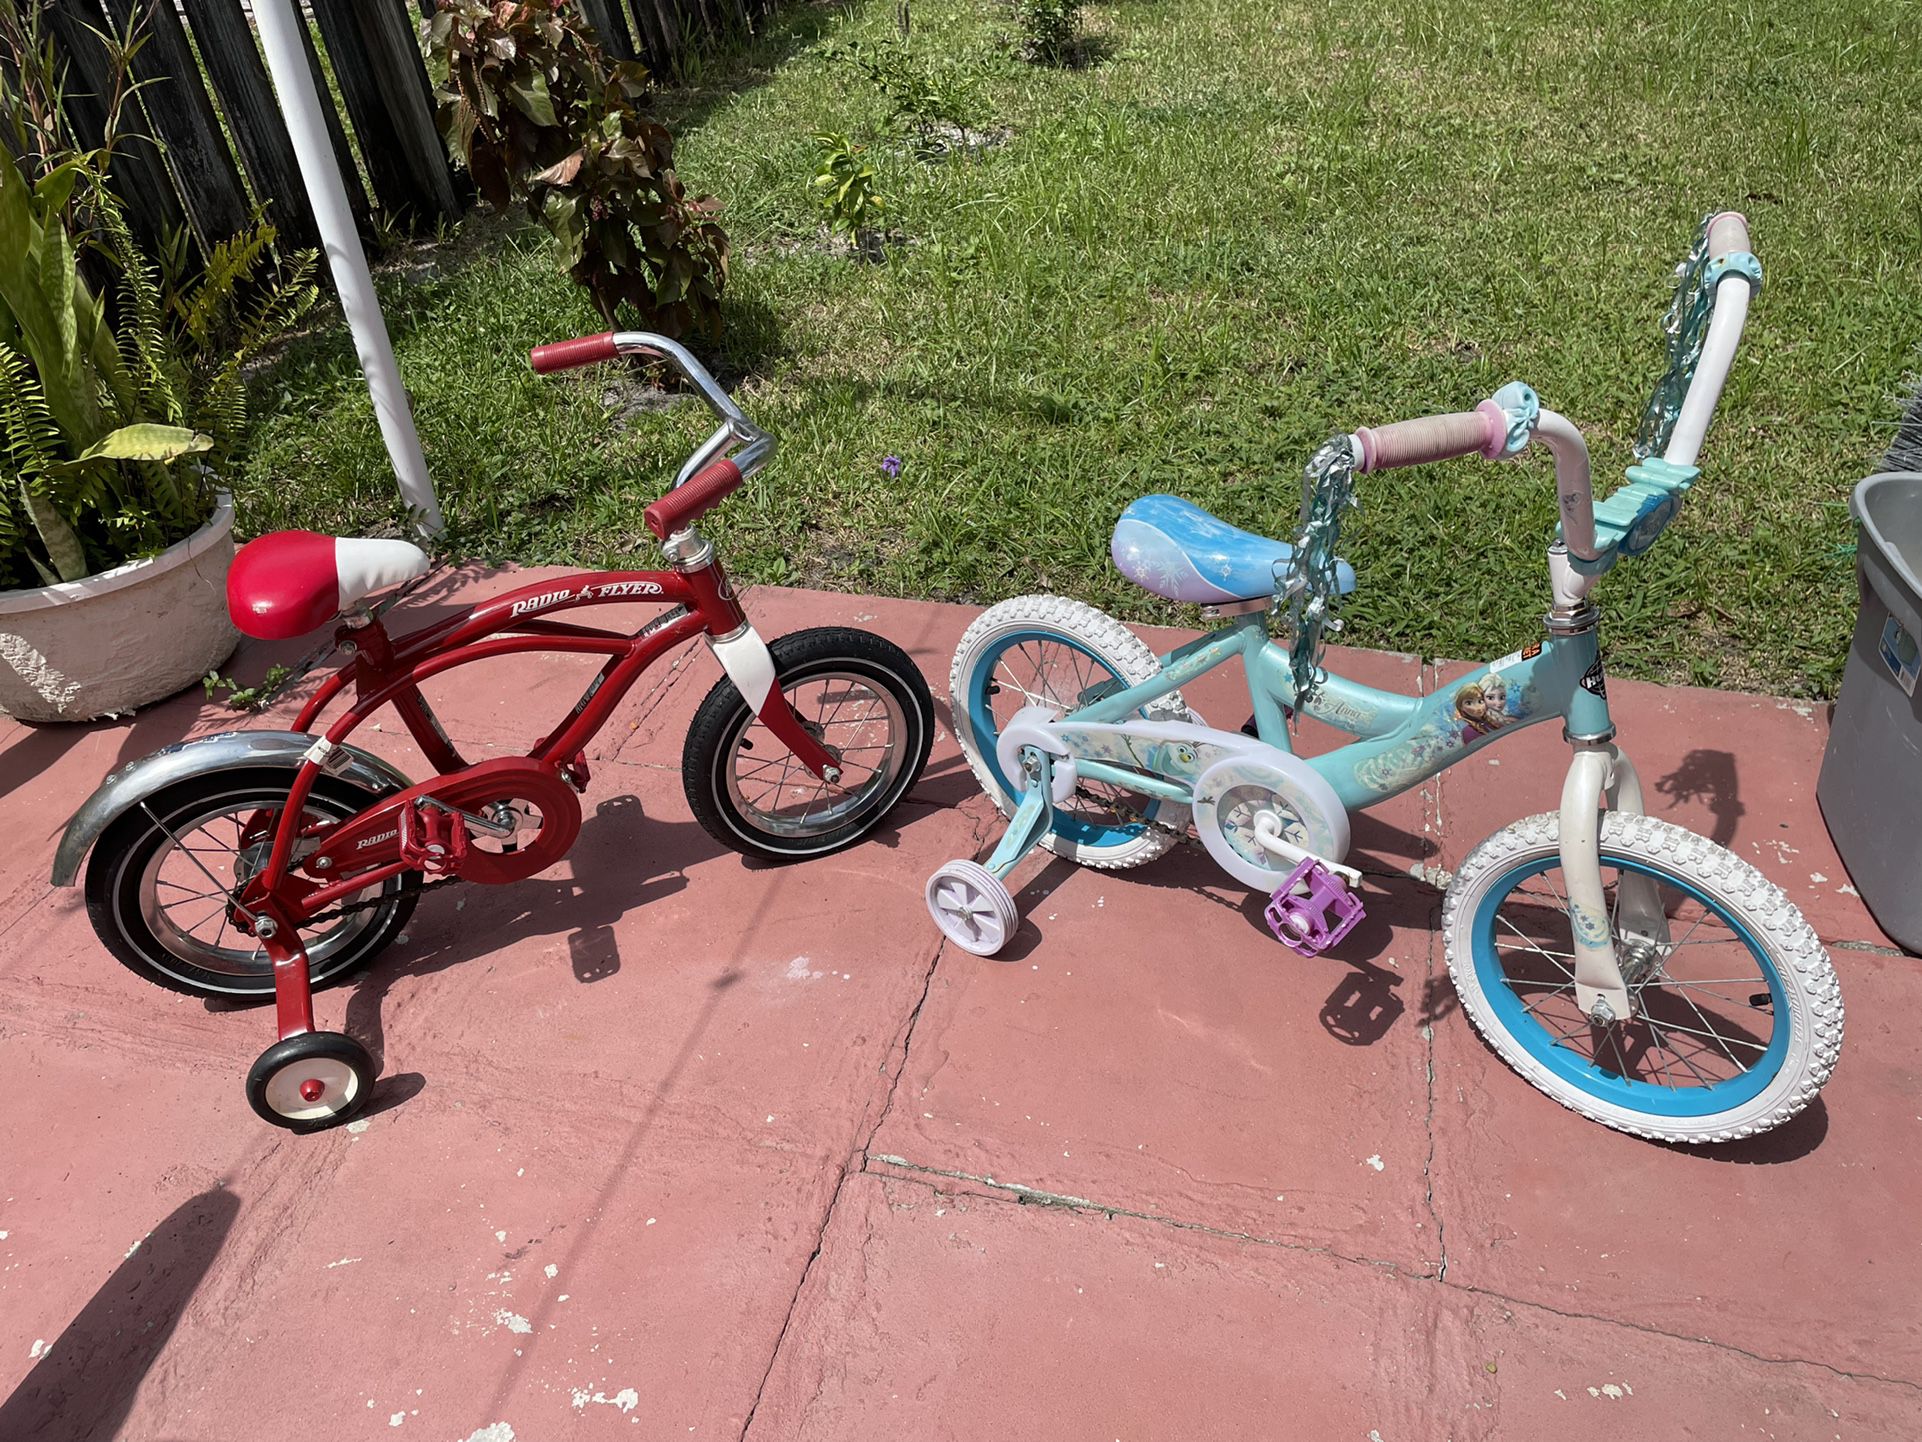 2 Kids Bikes 12” & 14” Used But Working Condition. $35 Each OBO.